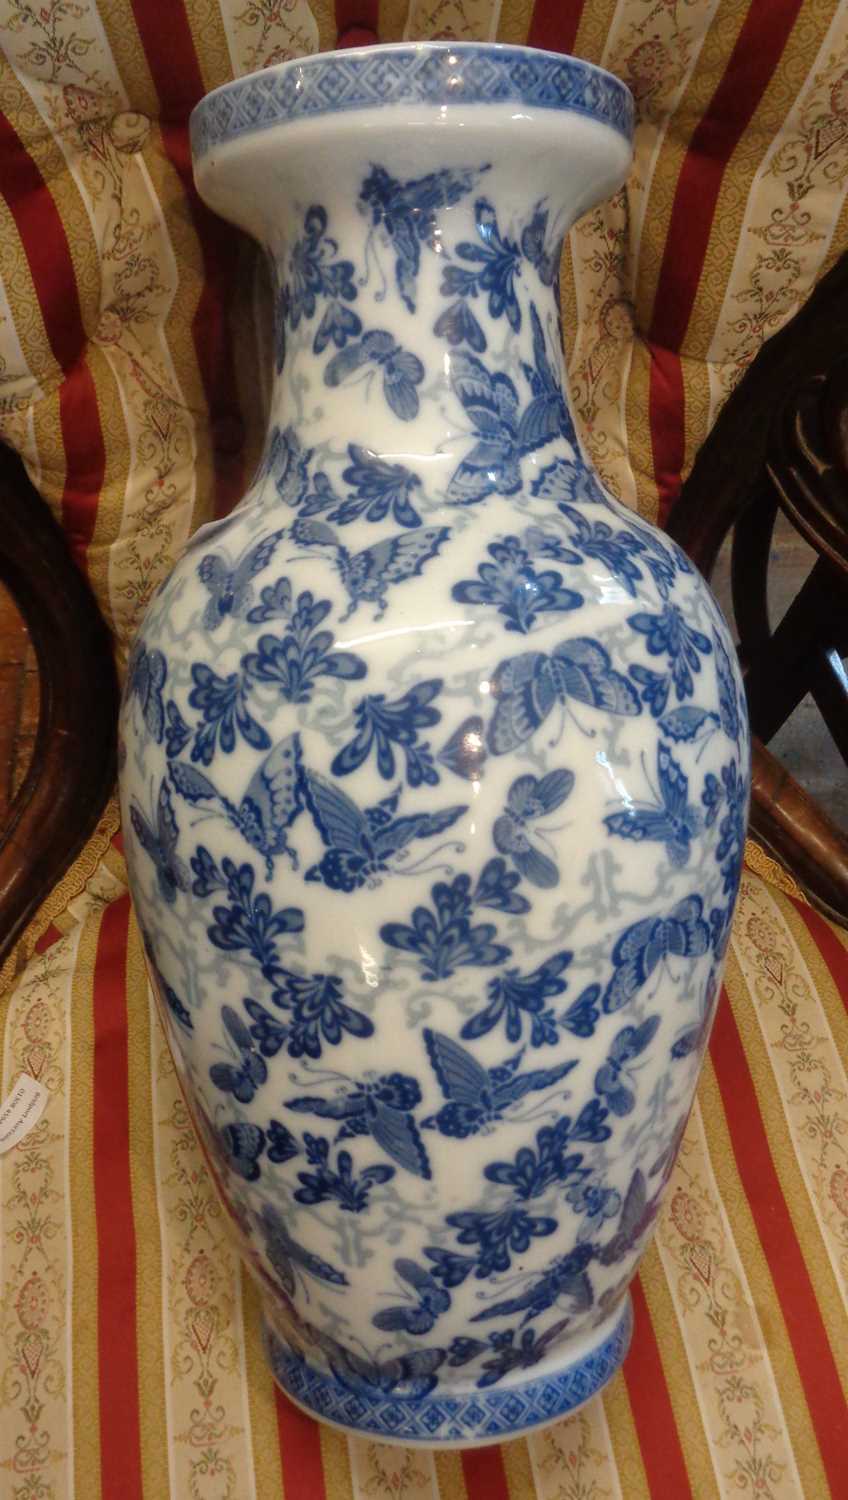 Modern Chinese blue and white floor vase - Image 2 of 4